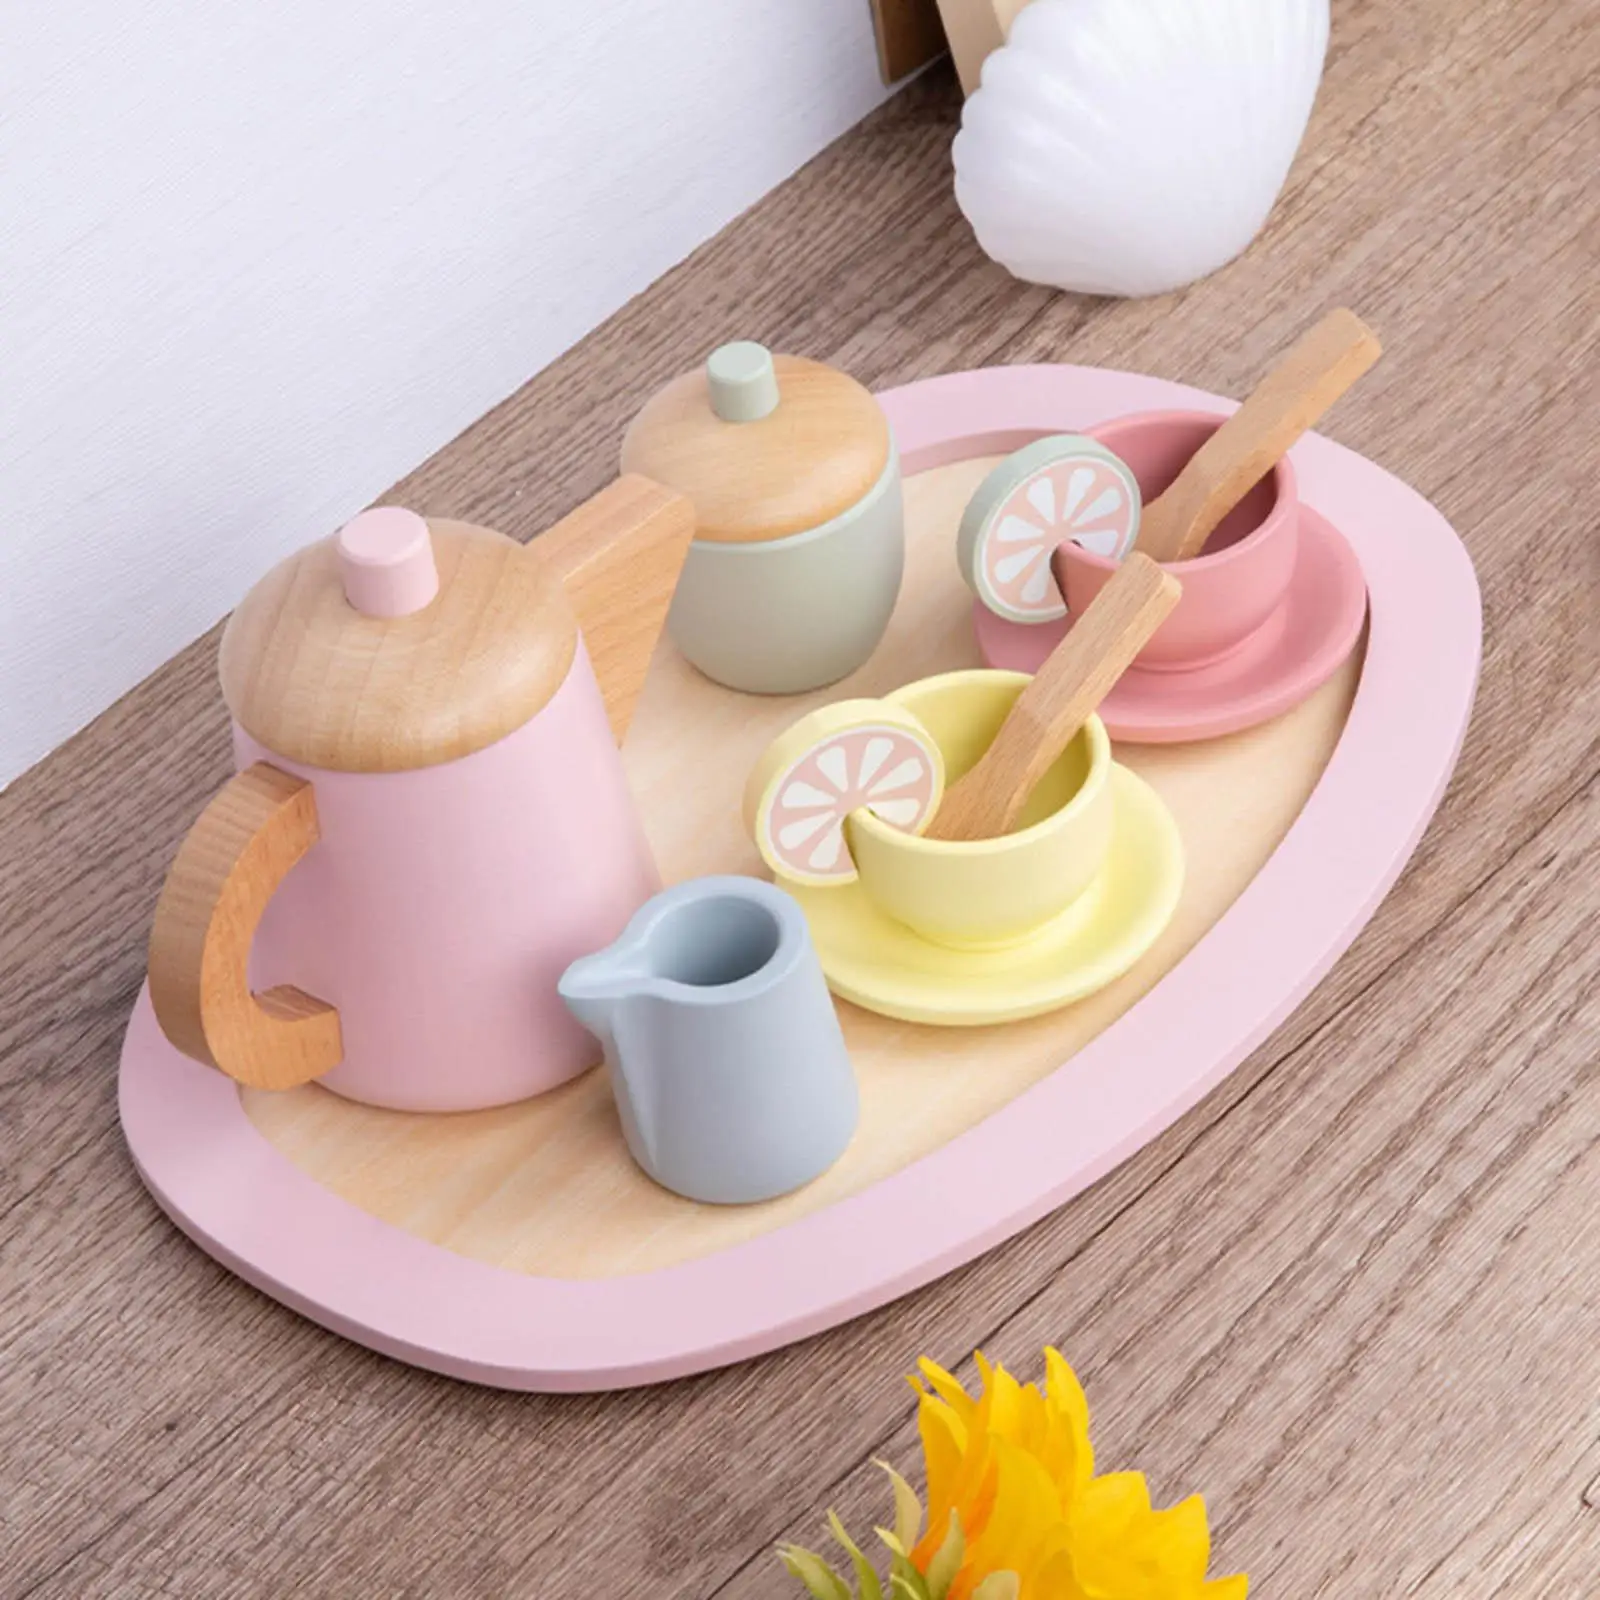 Wooden Tea Set set  Cup Saucers Spoons Tray Early Educational Wood Tableware Set  Years Up Birthday Gift